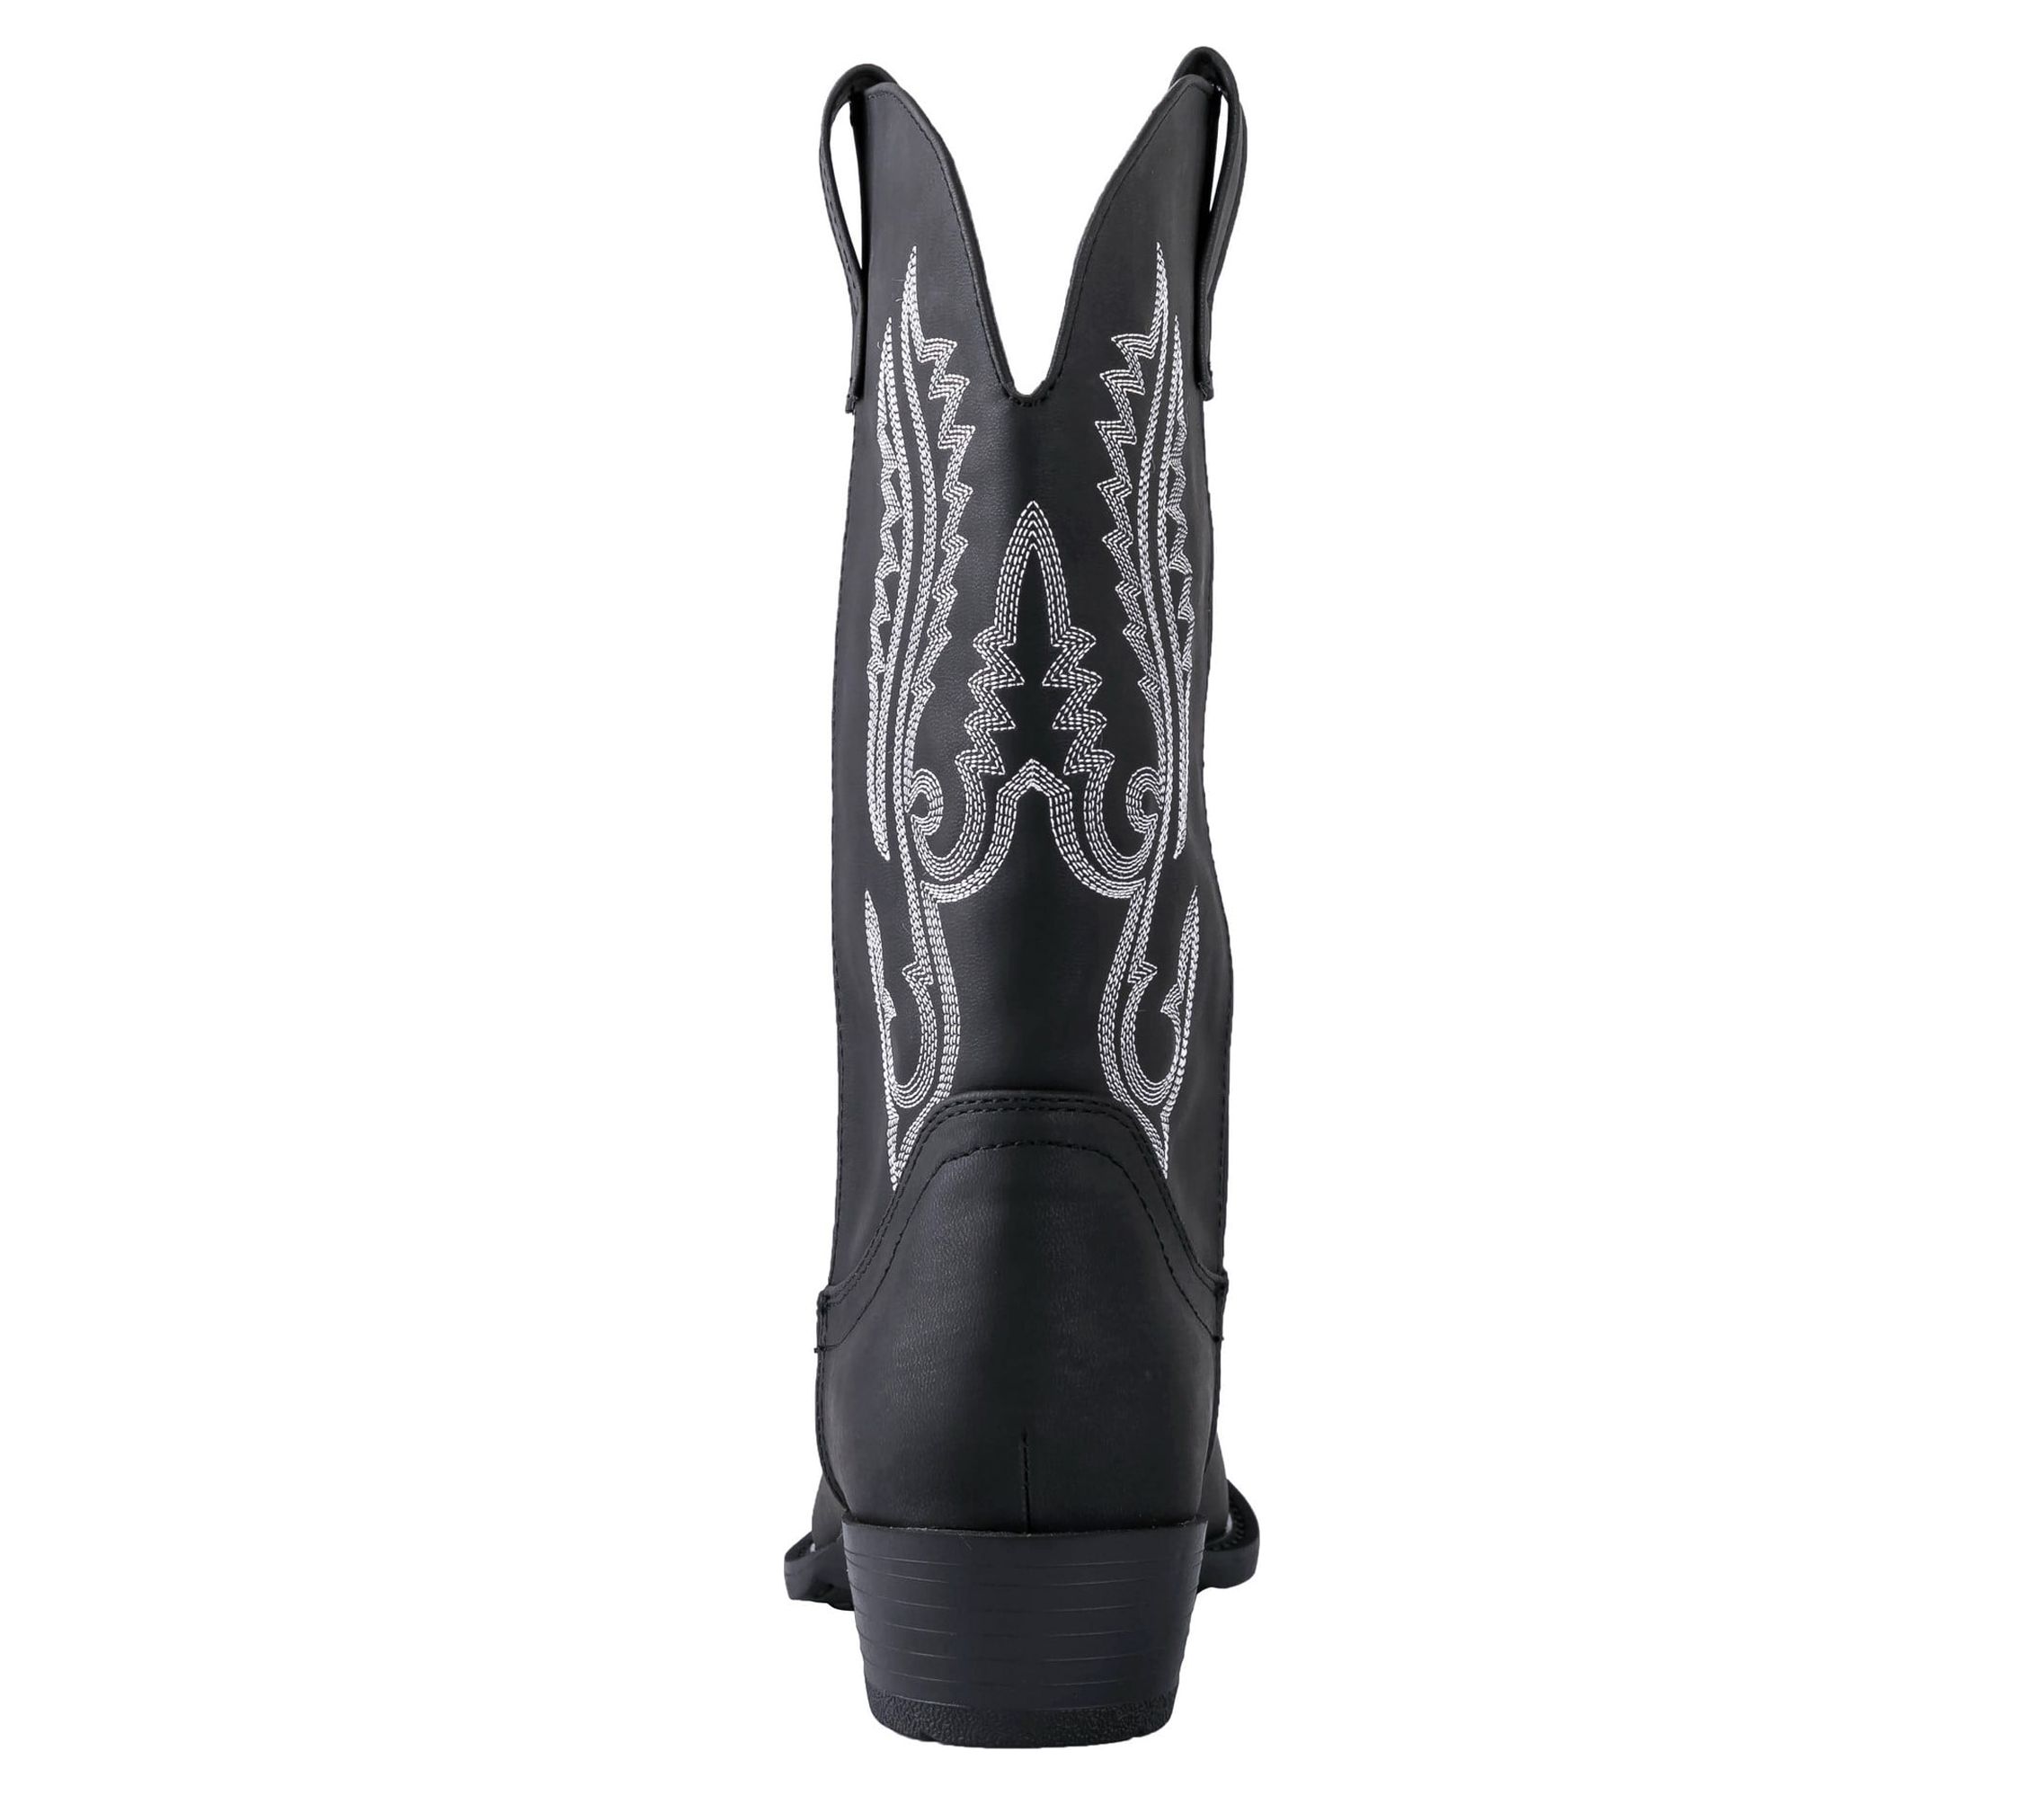 Canyon Trails Mens Classic Durable Round Toe Embroidered Western Rodeo Cowboy Boots - image 5 of 7